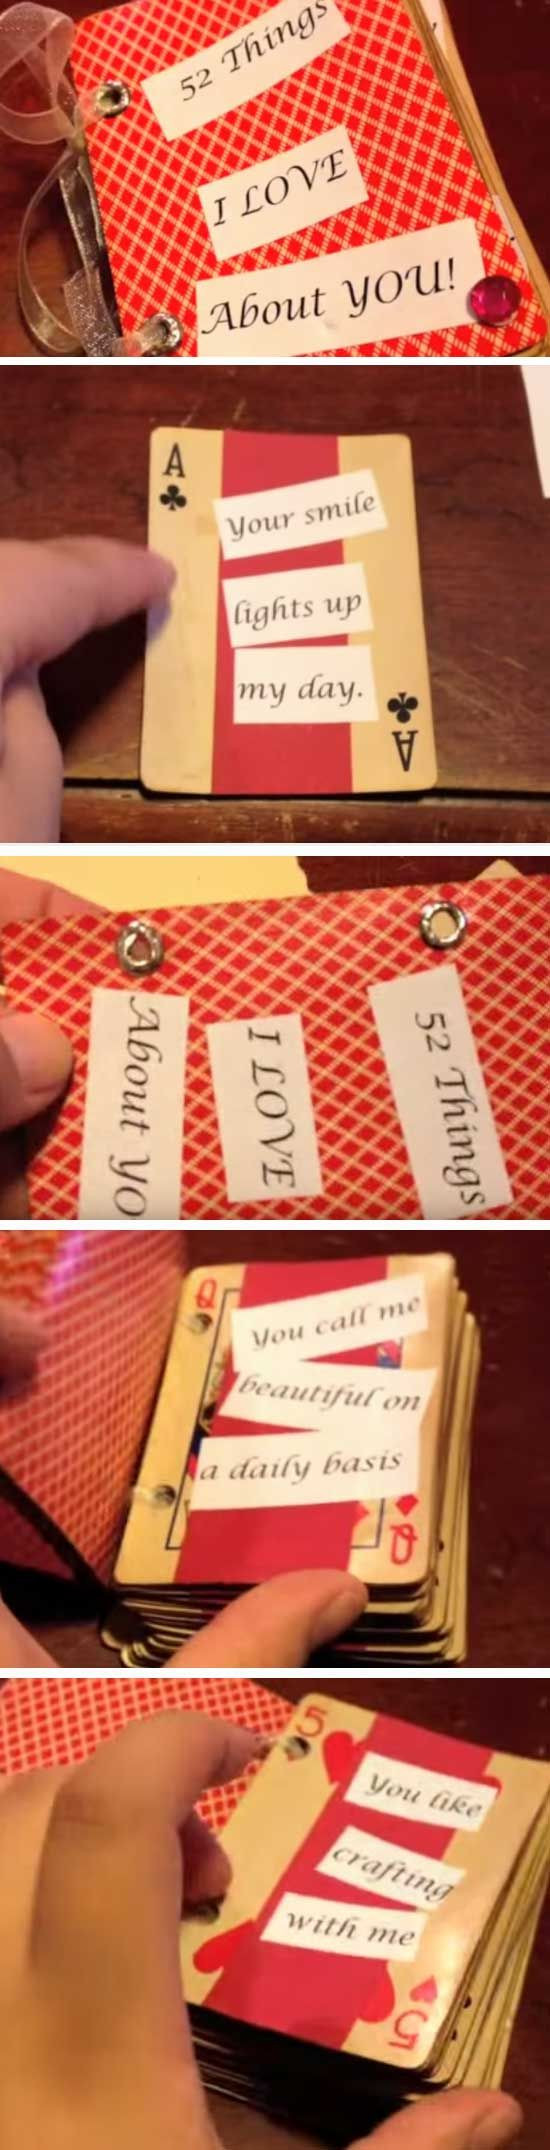 Cheap Birthday Gifts For Boyfriend
 Best 25 Inexpensive christmas presents ideas on Pinterest